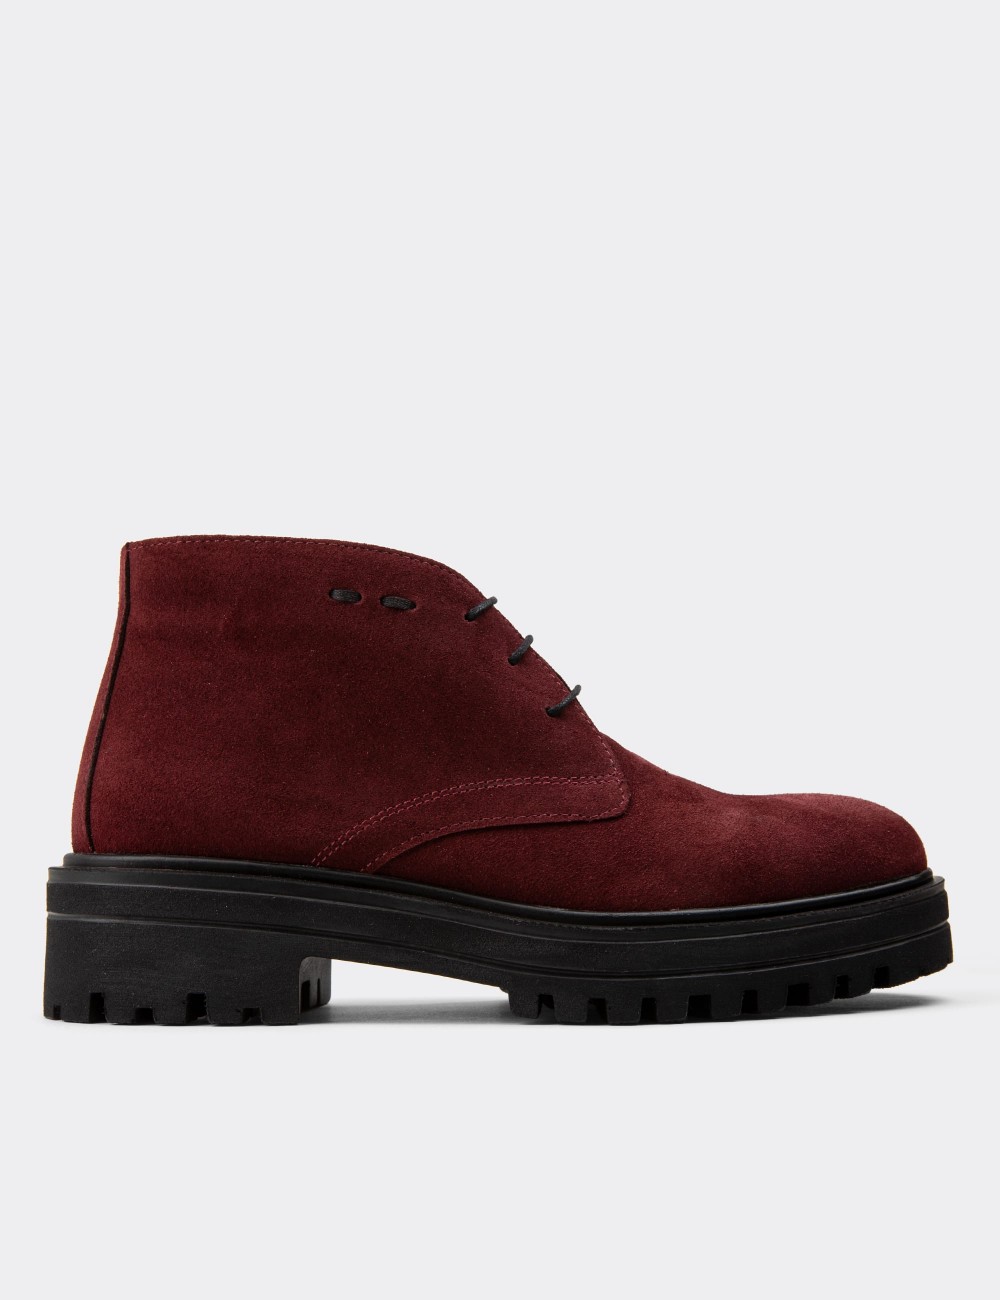 Burgundy Suede Leather Boots - 01847ZBRDE01